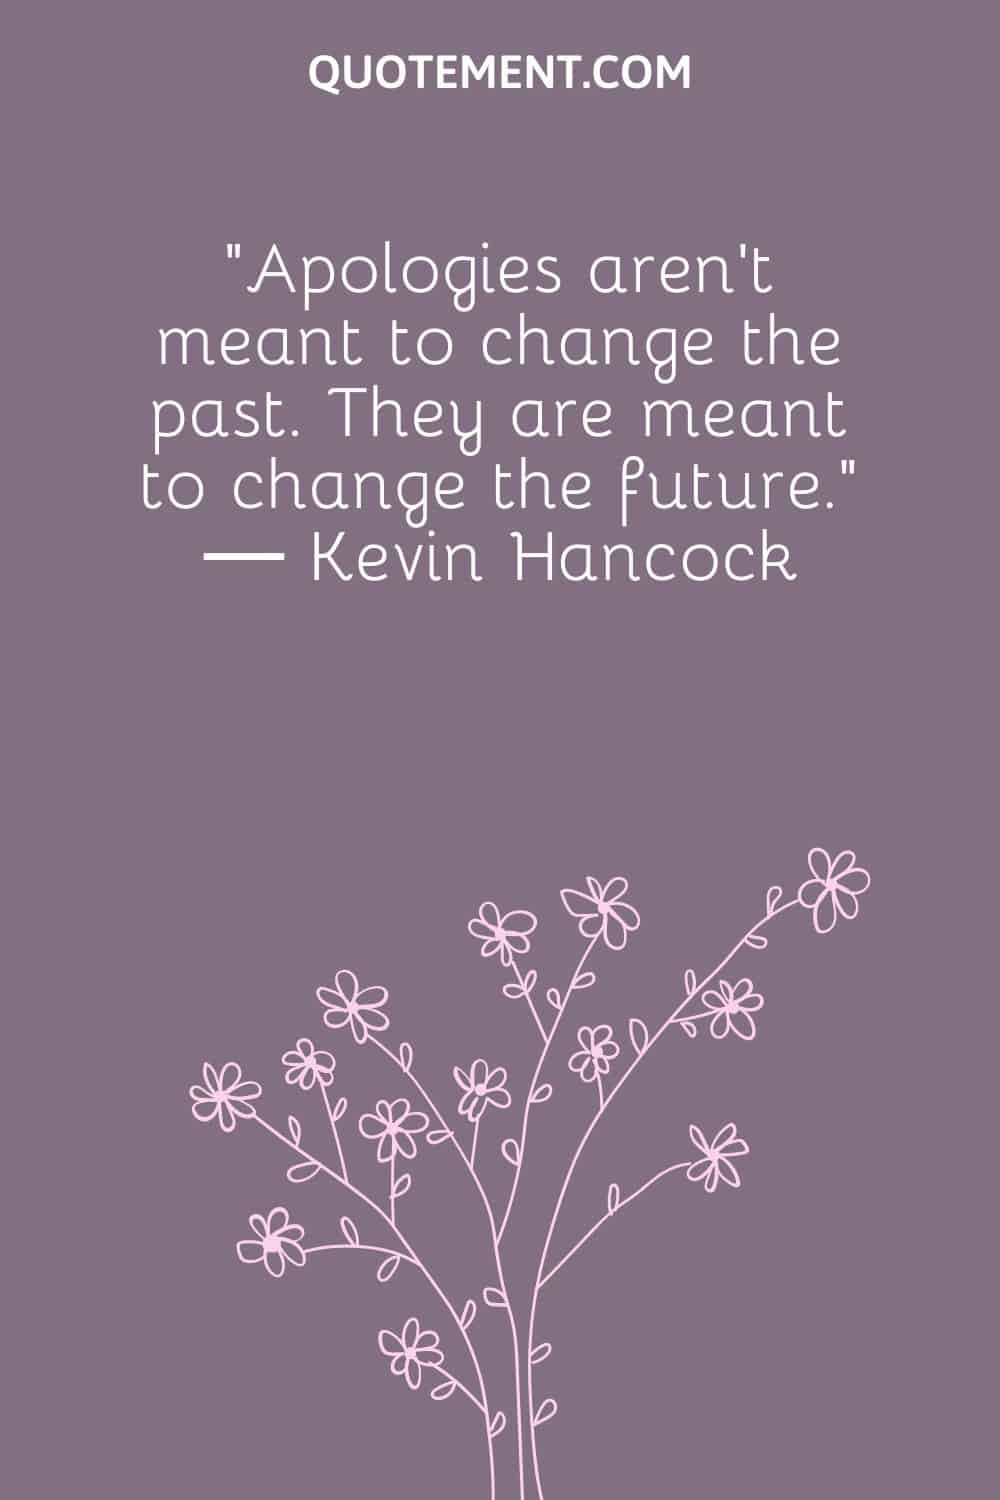 “Apologies aren’t meant to change the past. They are meant to change the future.” ― Kevin Hancock